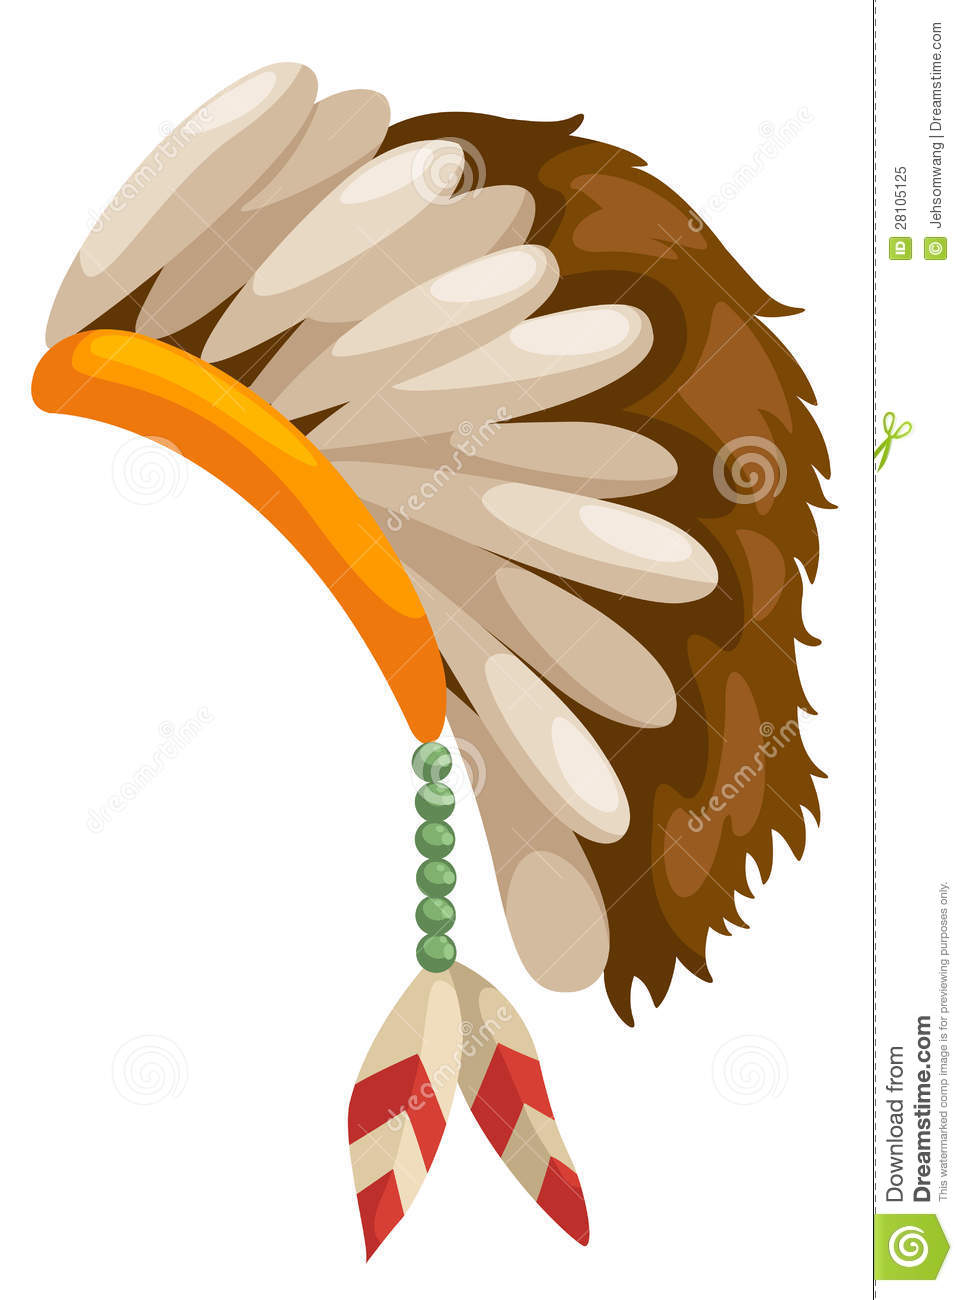 Feathered headdress clipart - Clipground